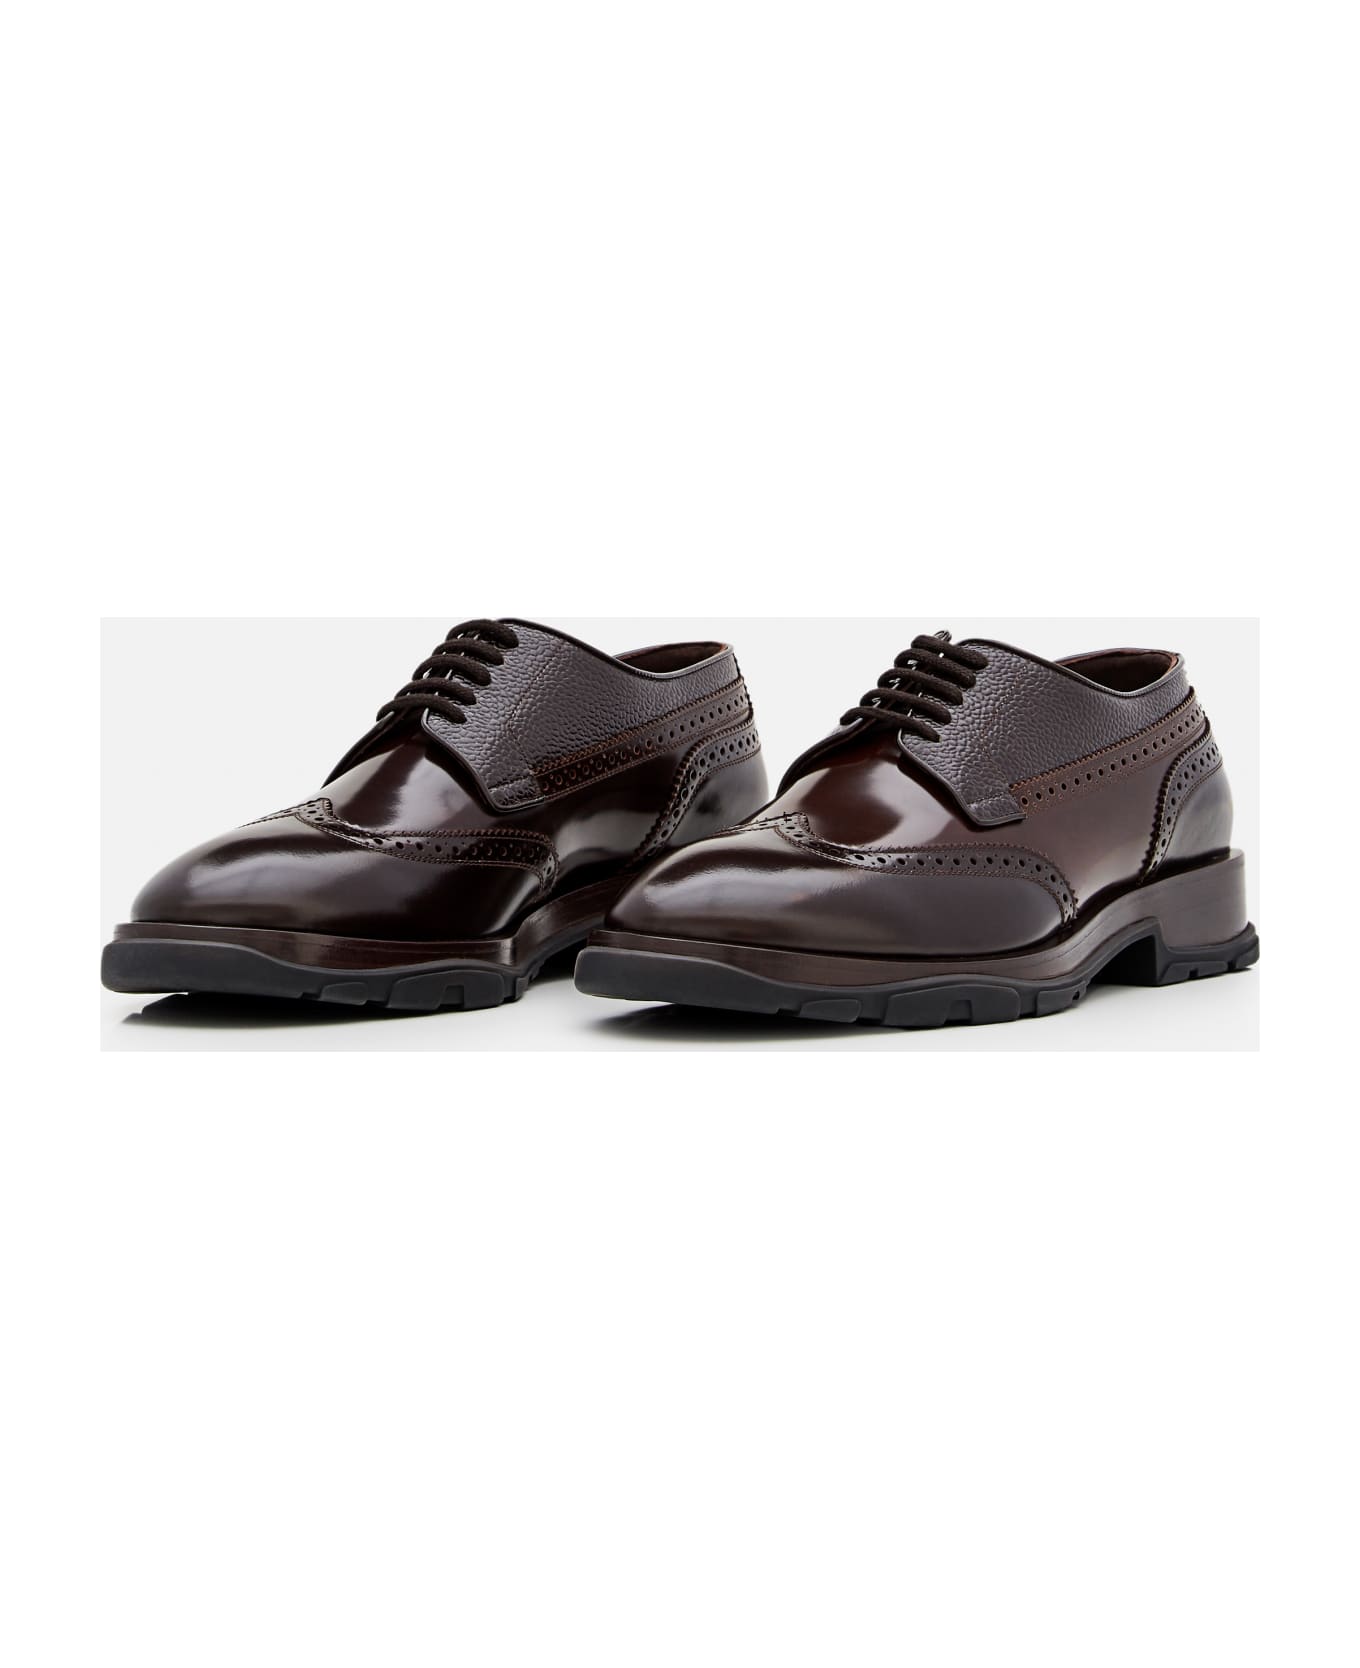 Alexander McQueen Derby Leather Shoes - Brown